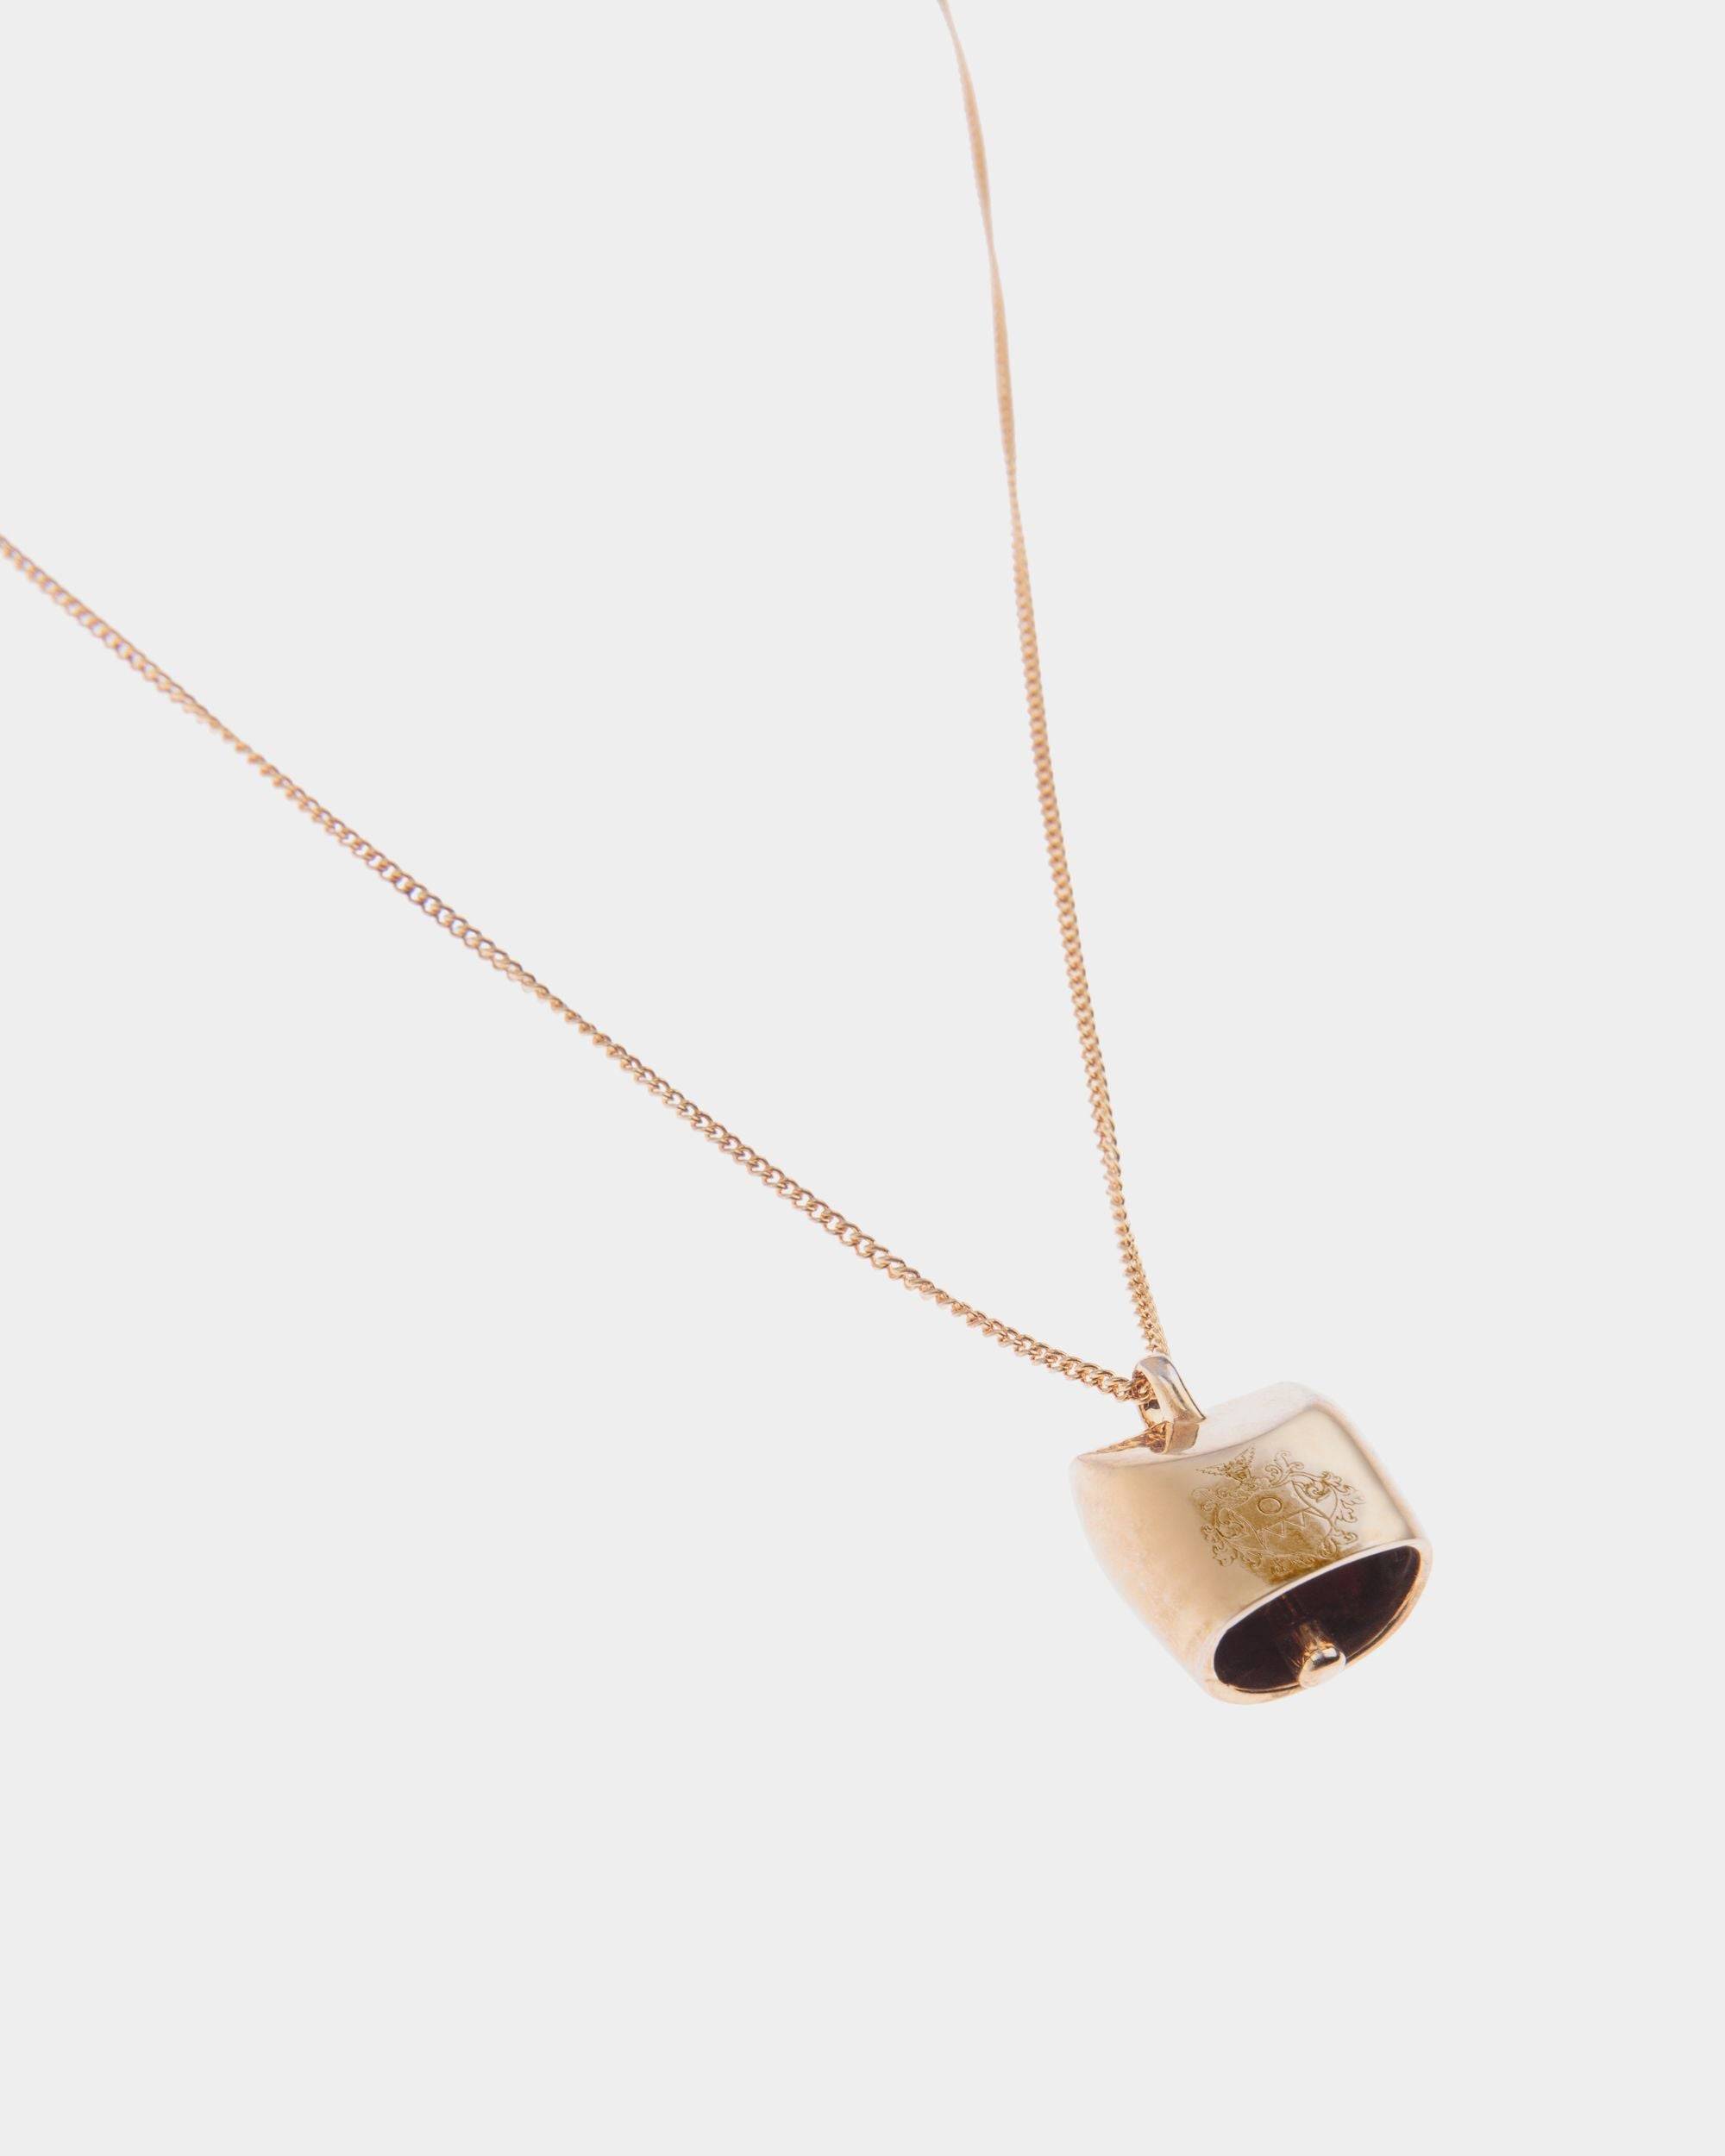 Belle | Women's Necklace in Gold Eco Brass | Bally | Still Life Detail